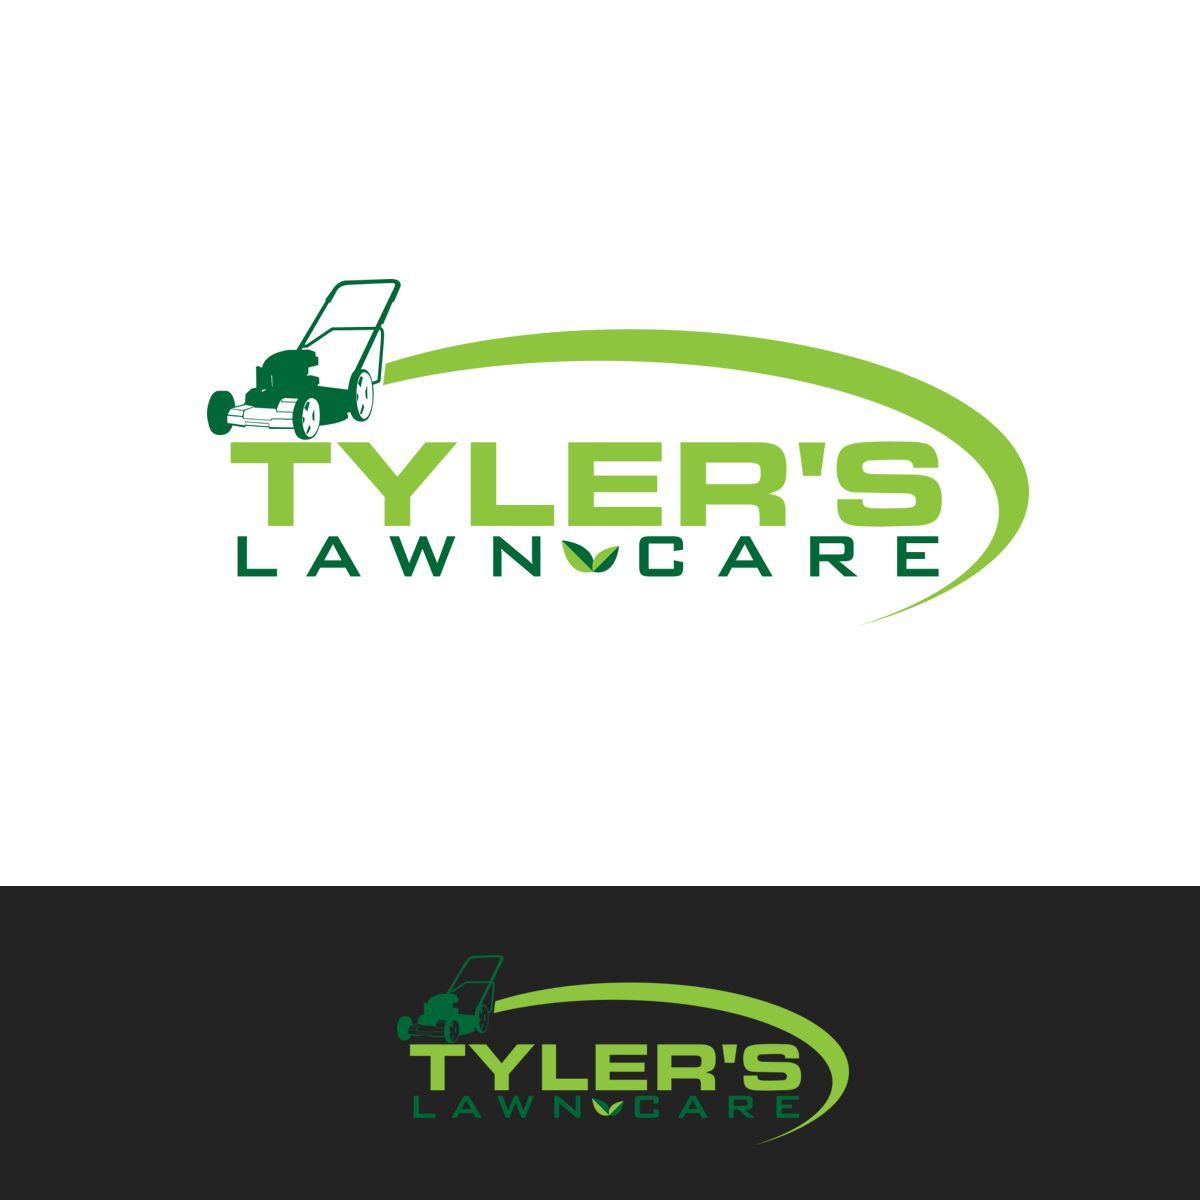 Lawn Care Logo - Modern, Professional, Lawn Care Logo Design for Tyler's Lawn Care